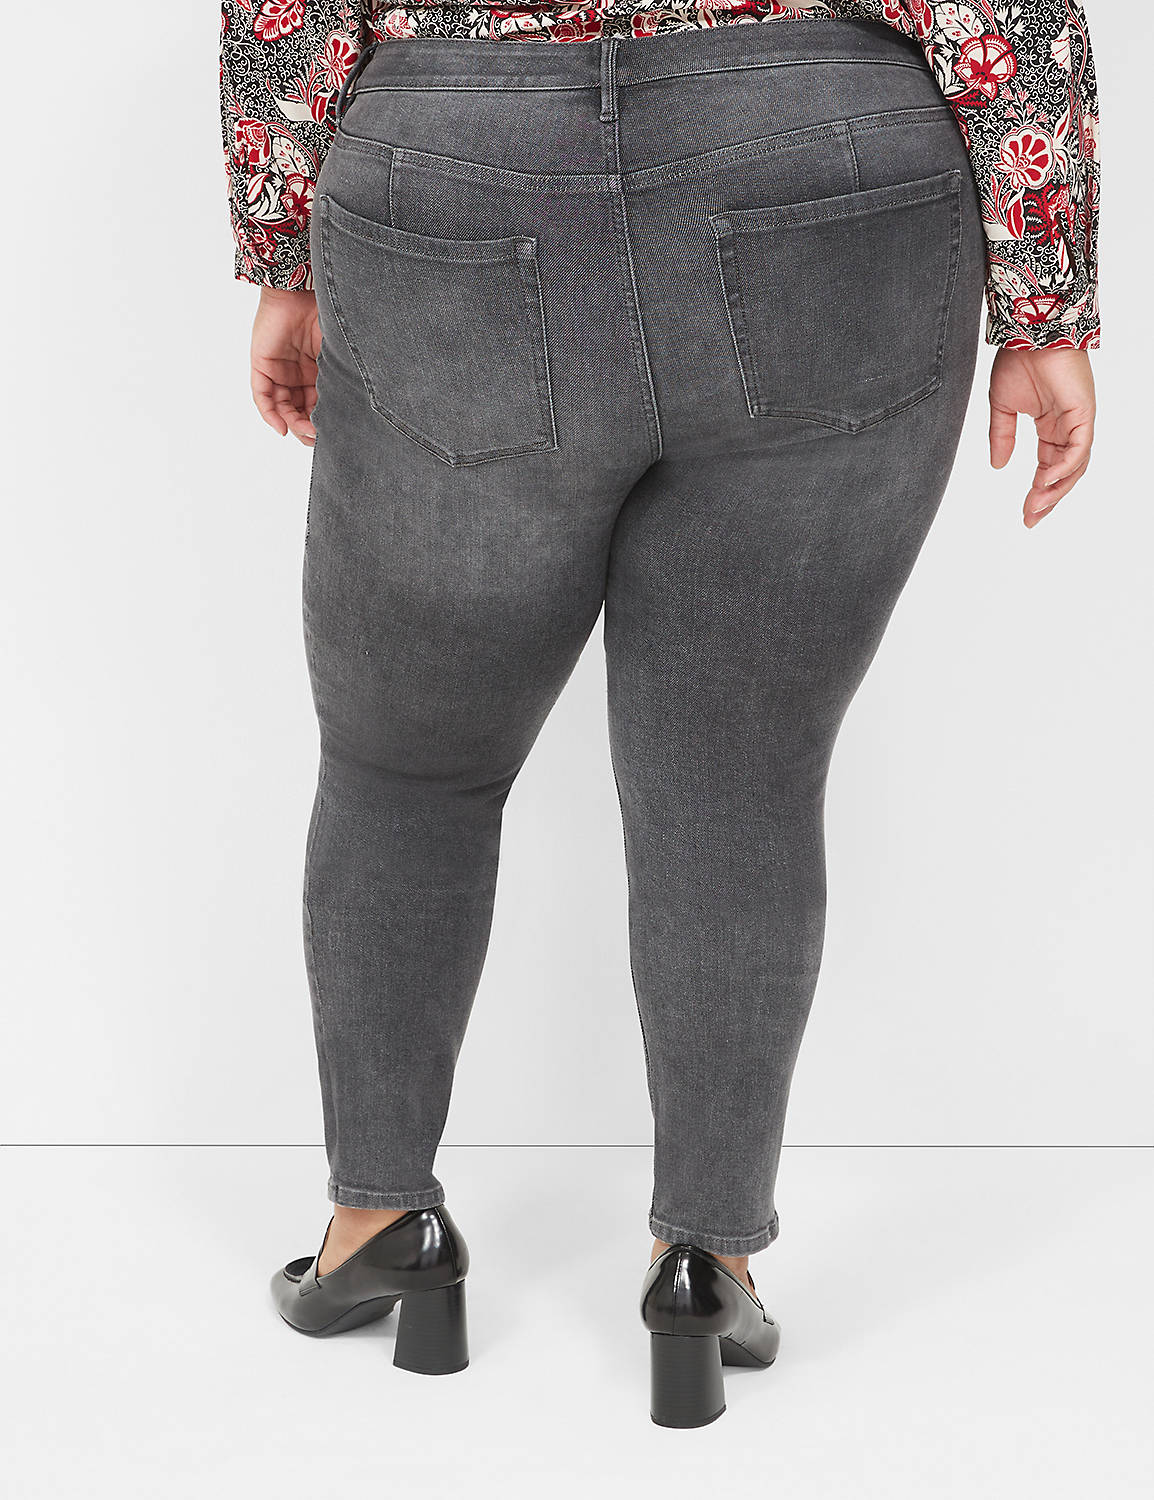 SIGNATURE MID RISE SKINNY - GREY CL Product Image 2